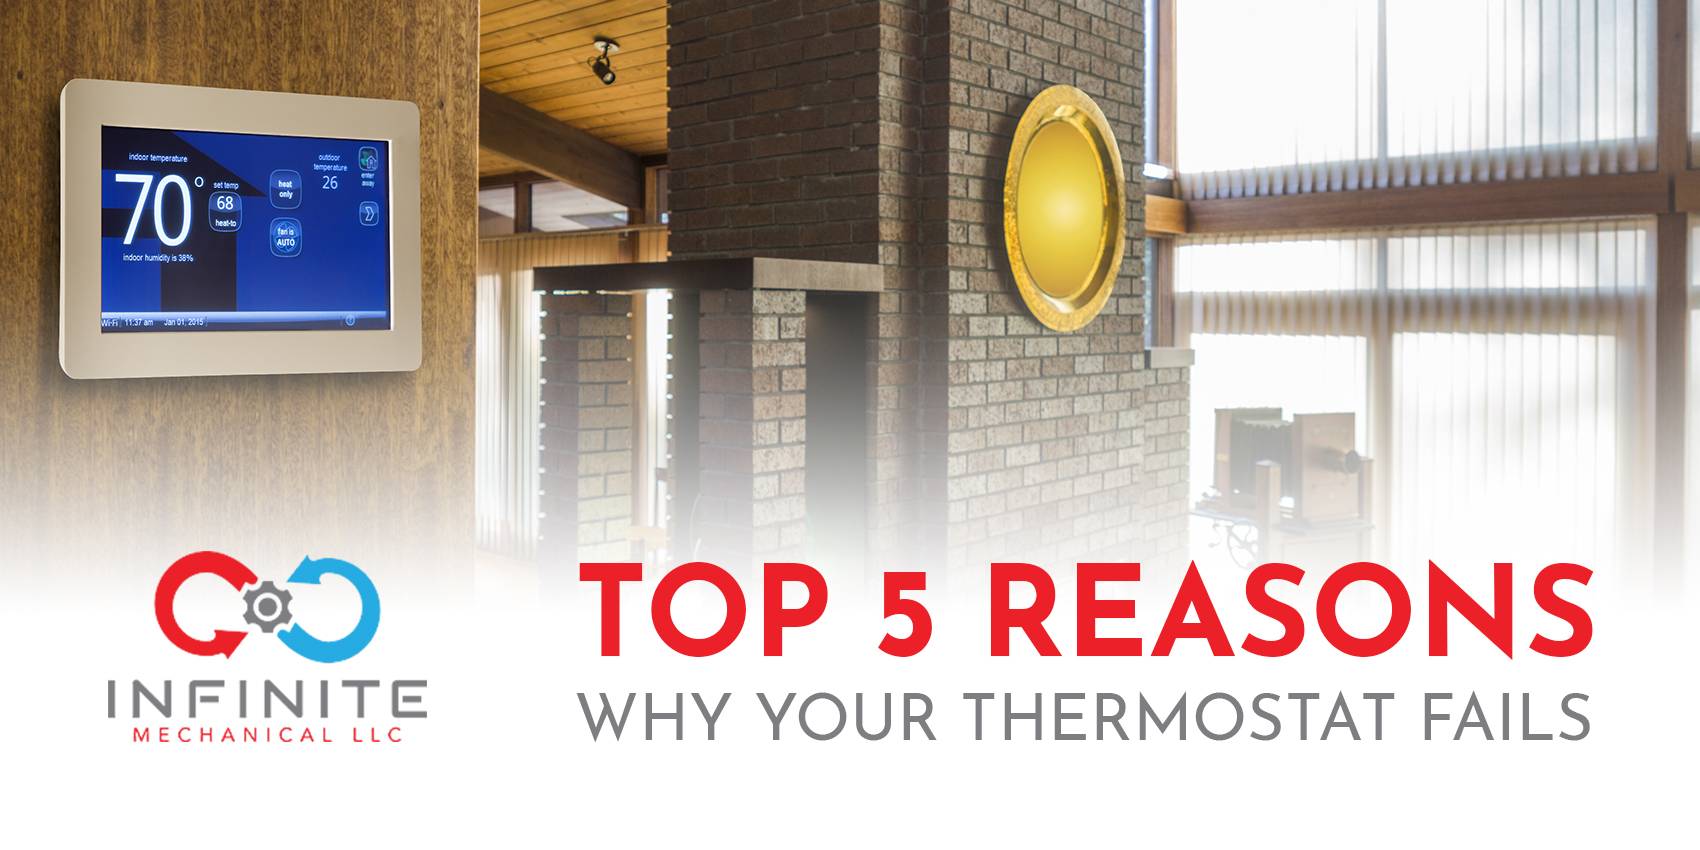 Top 5 Reasons Why Your Thermostat Fails